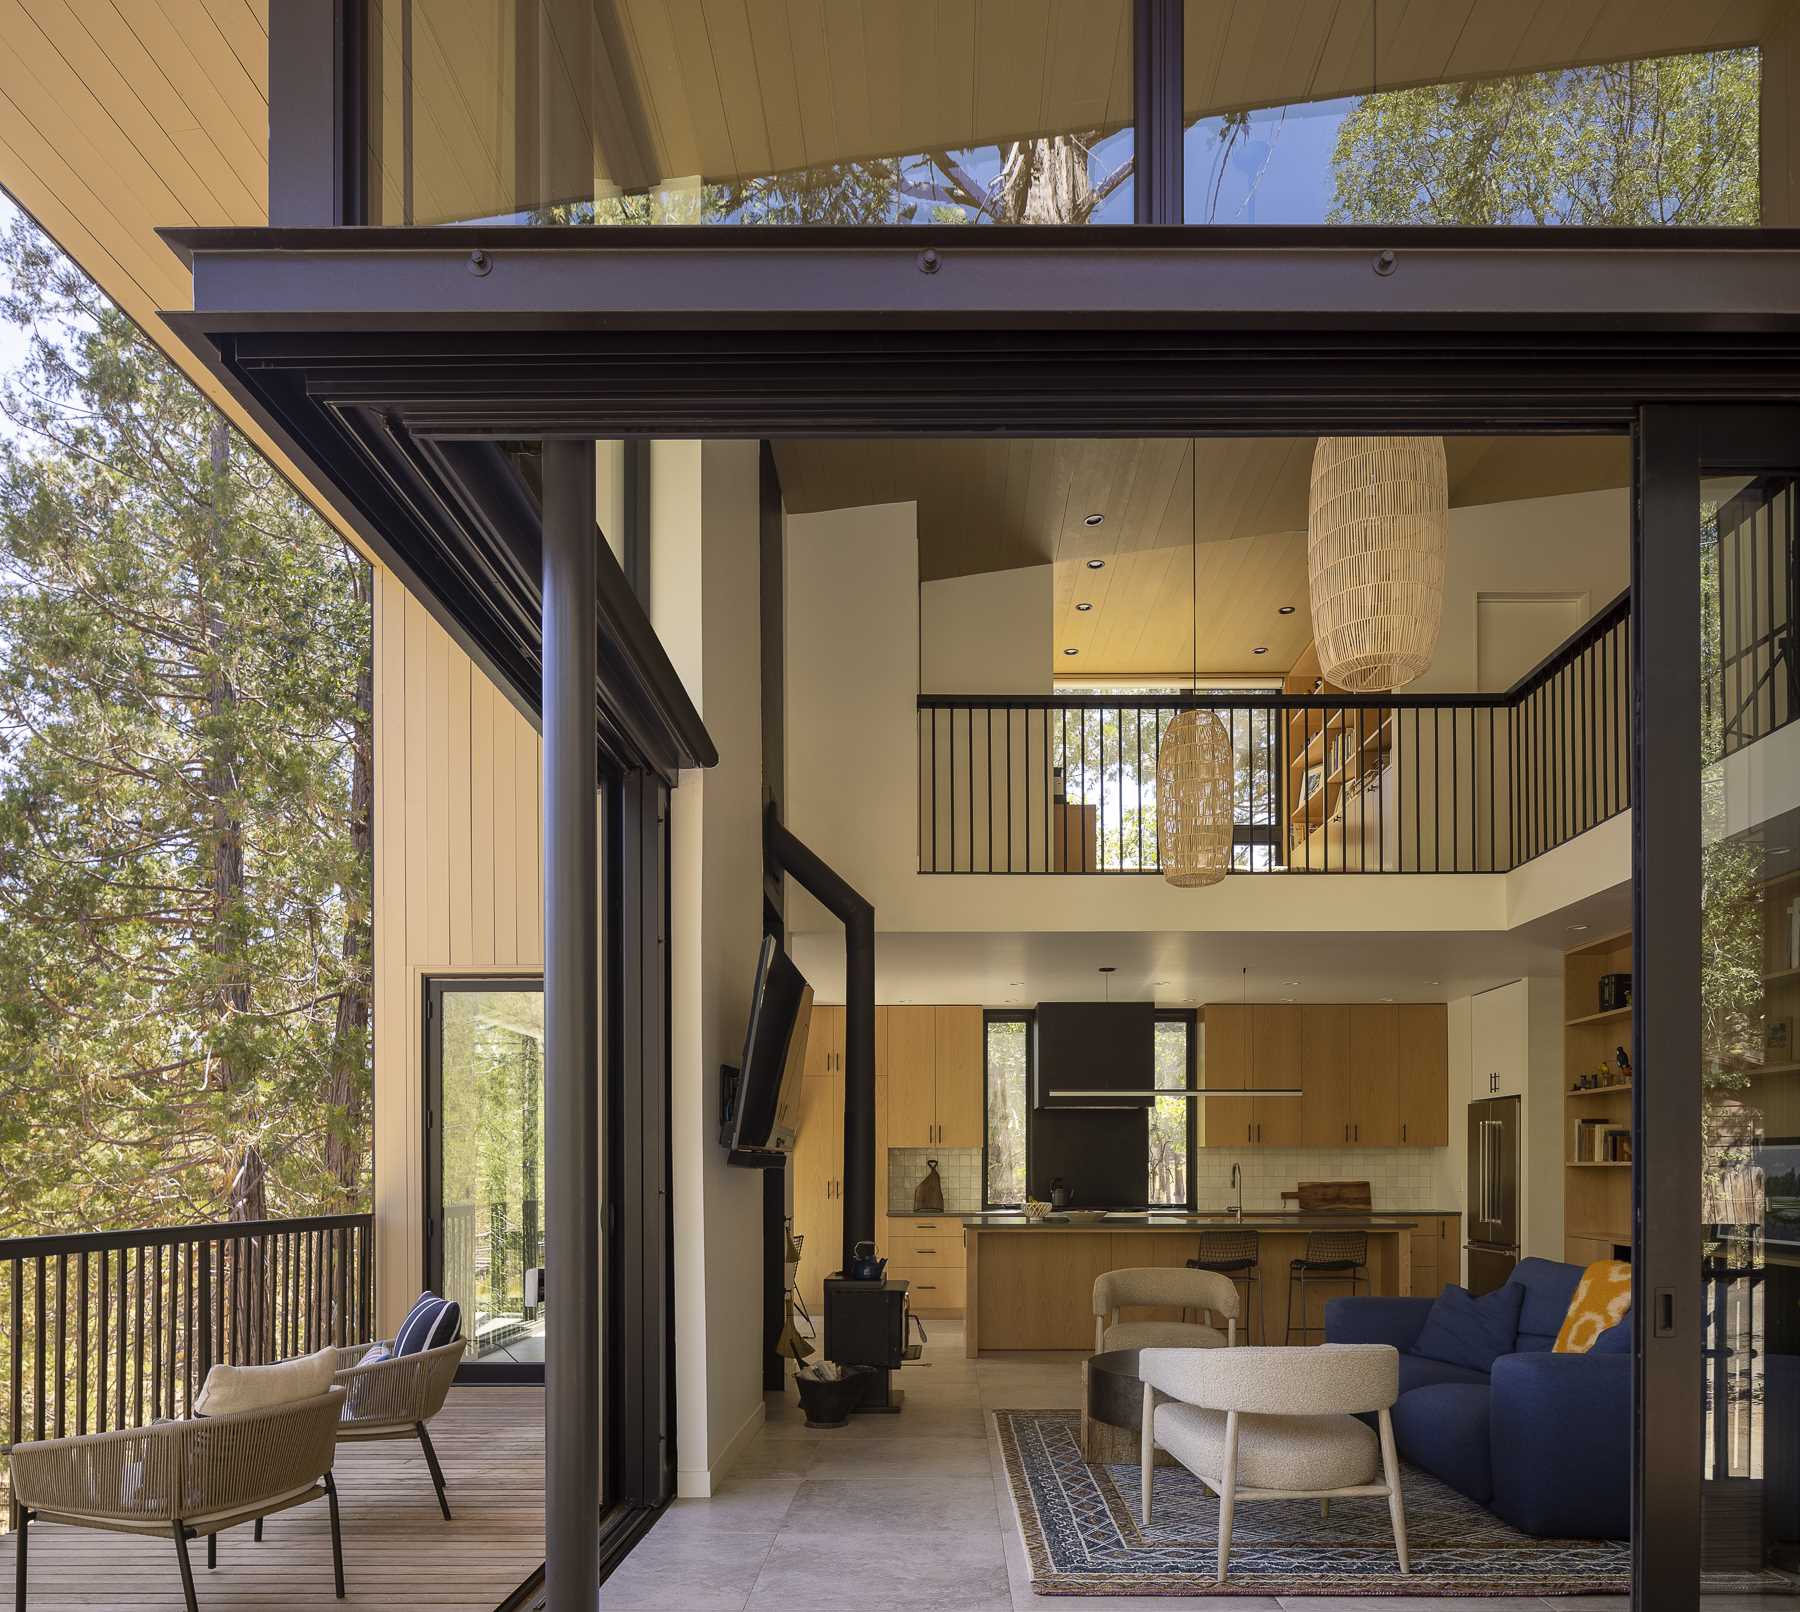 Large sliding glass doors slide open to allow the living room to connect with the deck, creating an indoor/outdoor living experience. 